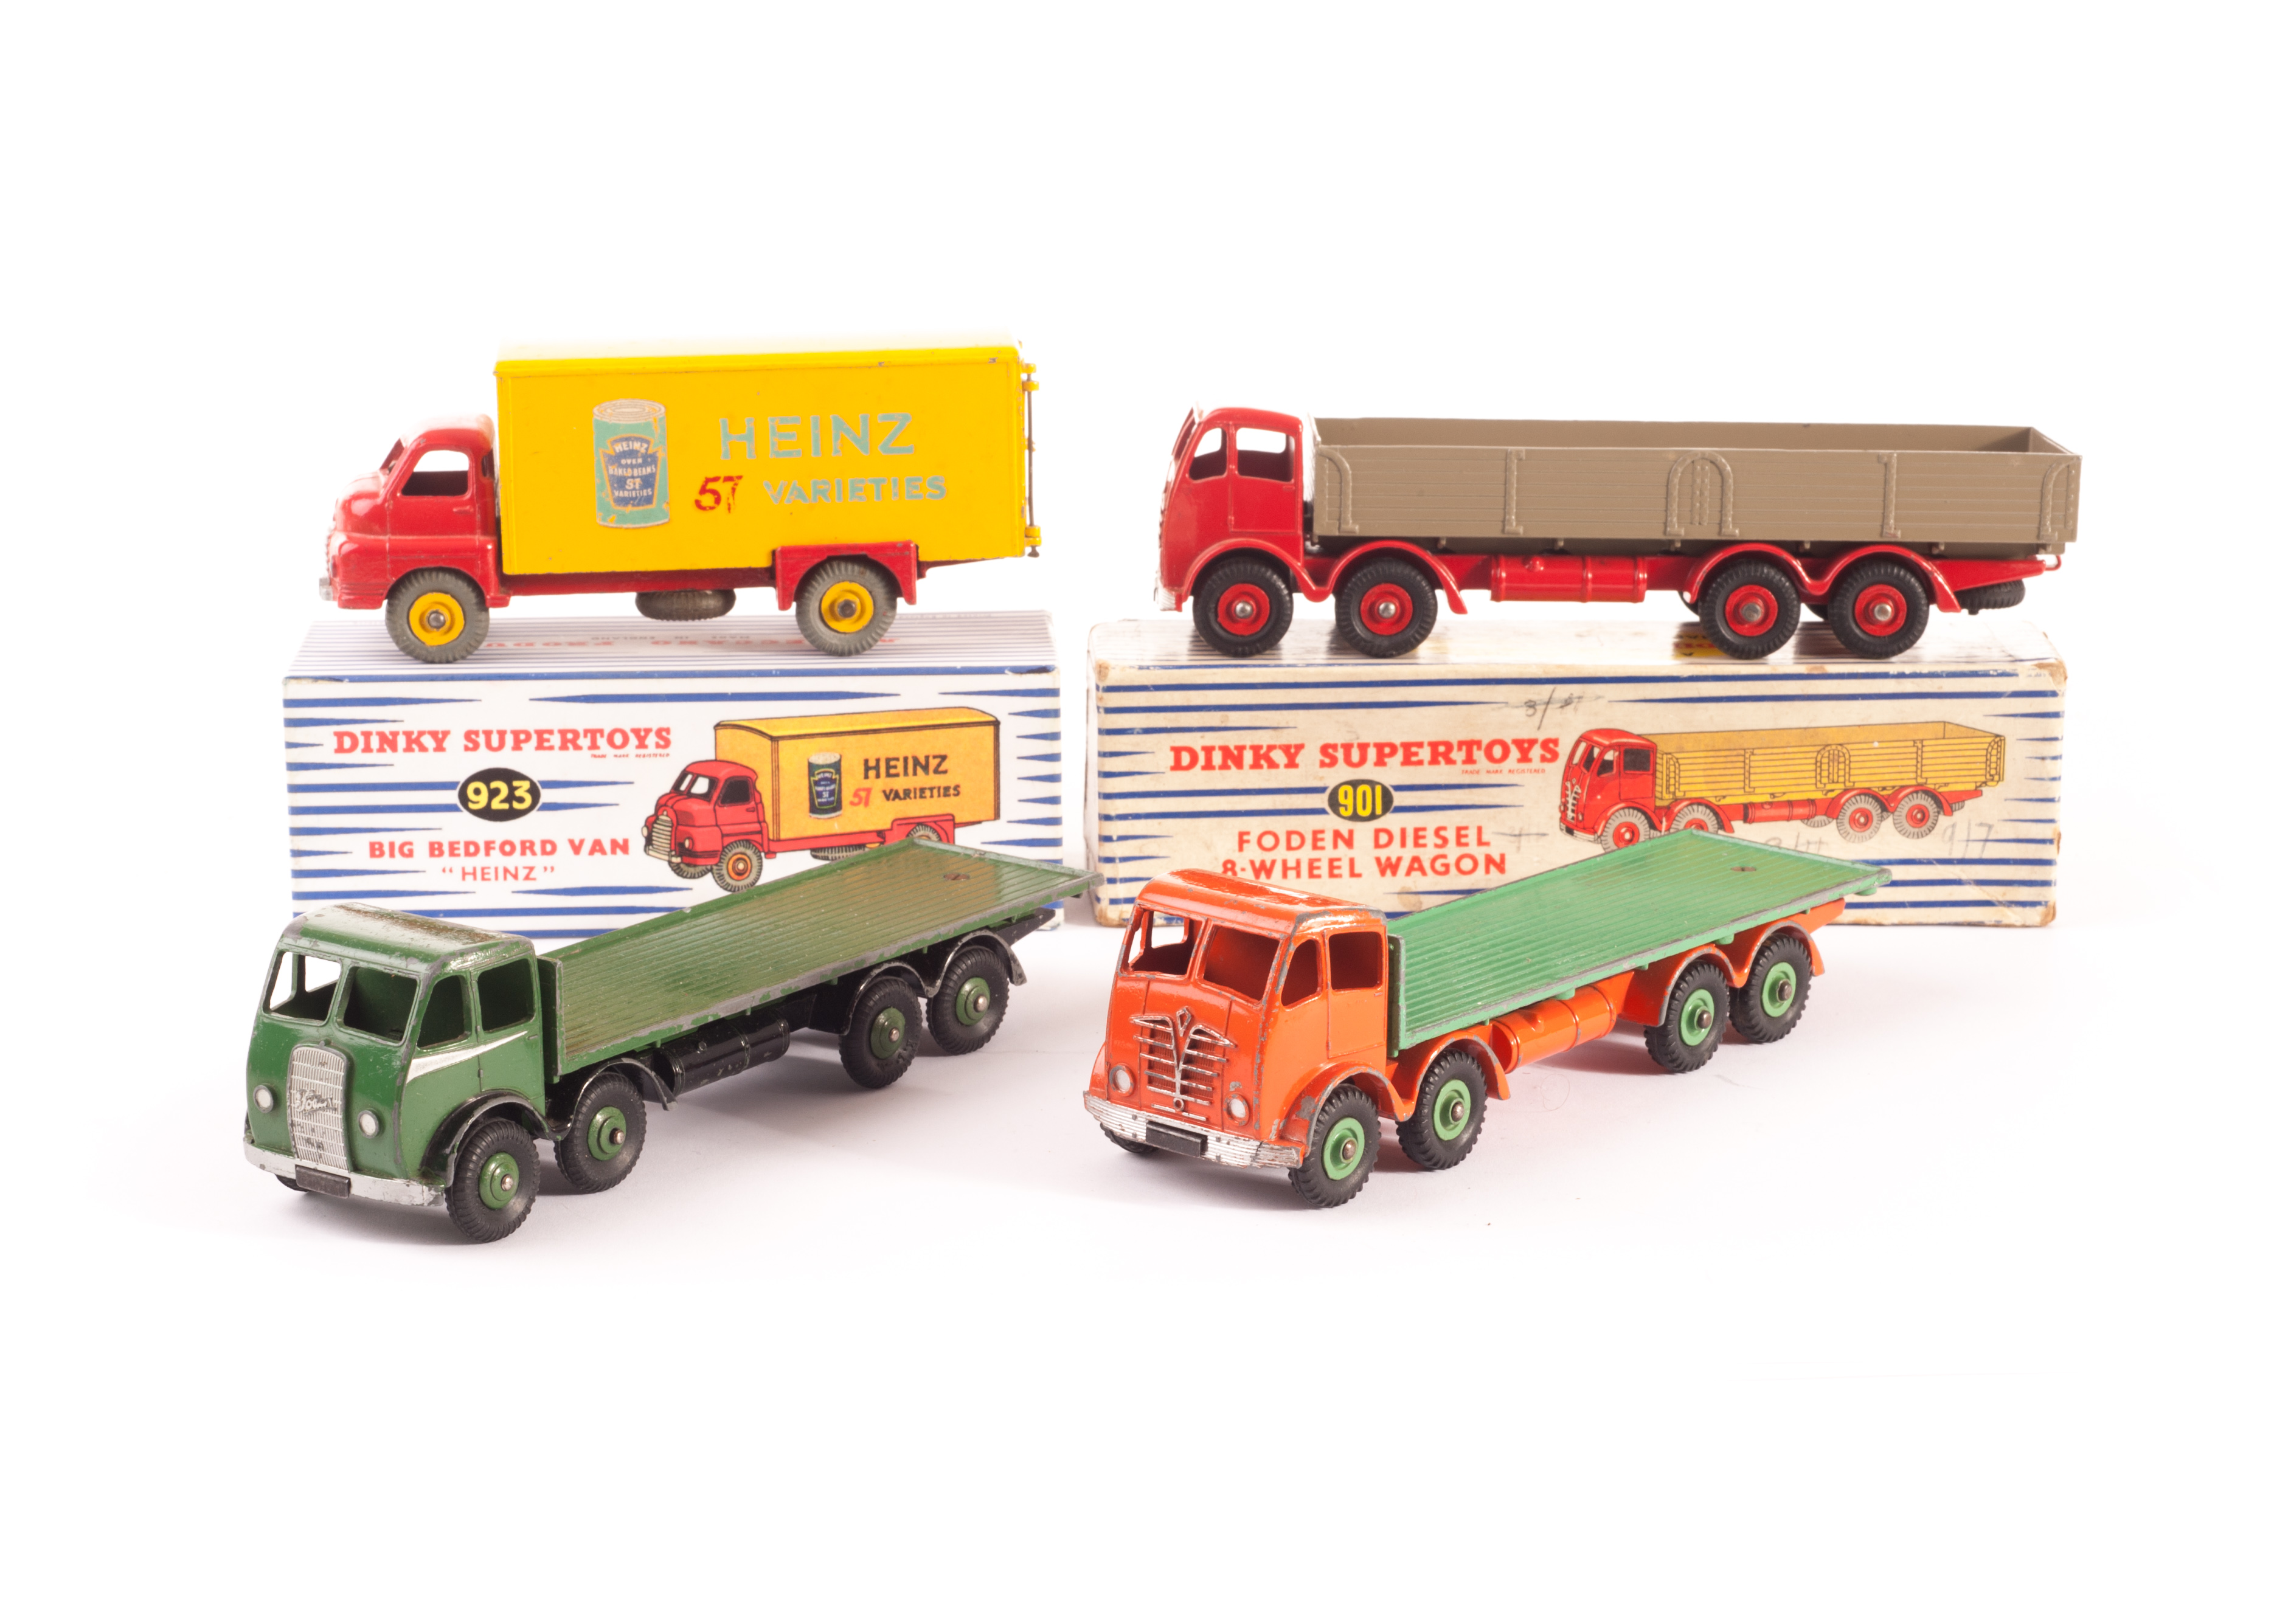 A Dinky Supertoys 901 Foden Diesel 8-Wheel Wagon, 2nd type red cab and chassis, fawn truck body,